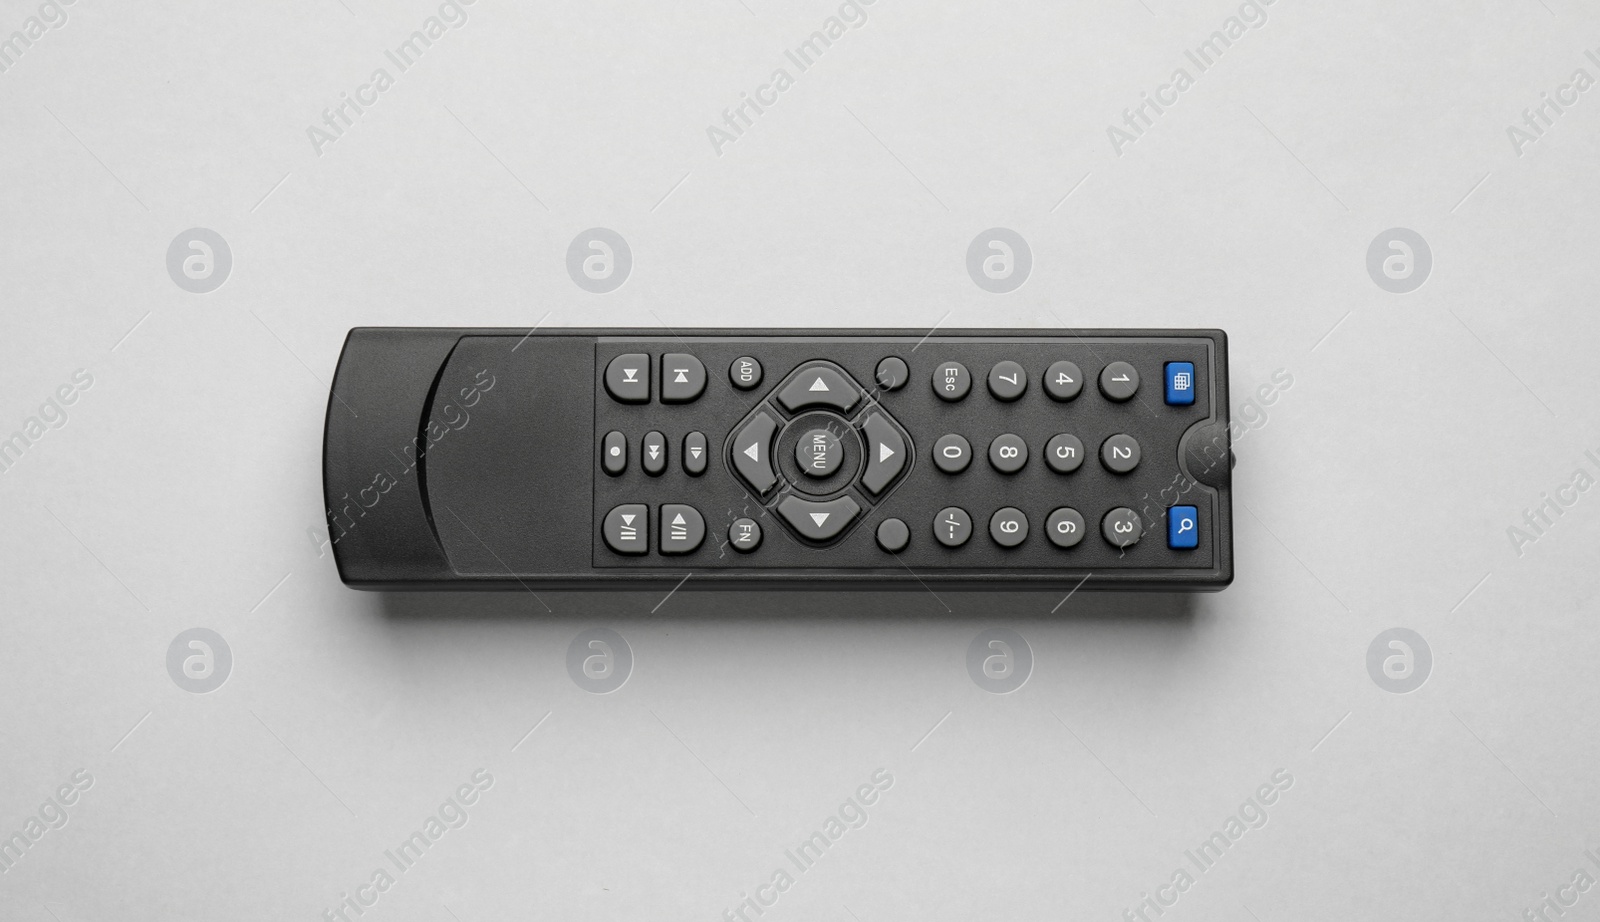 Photo of Remote control on light grey background, top view